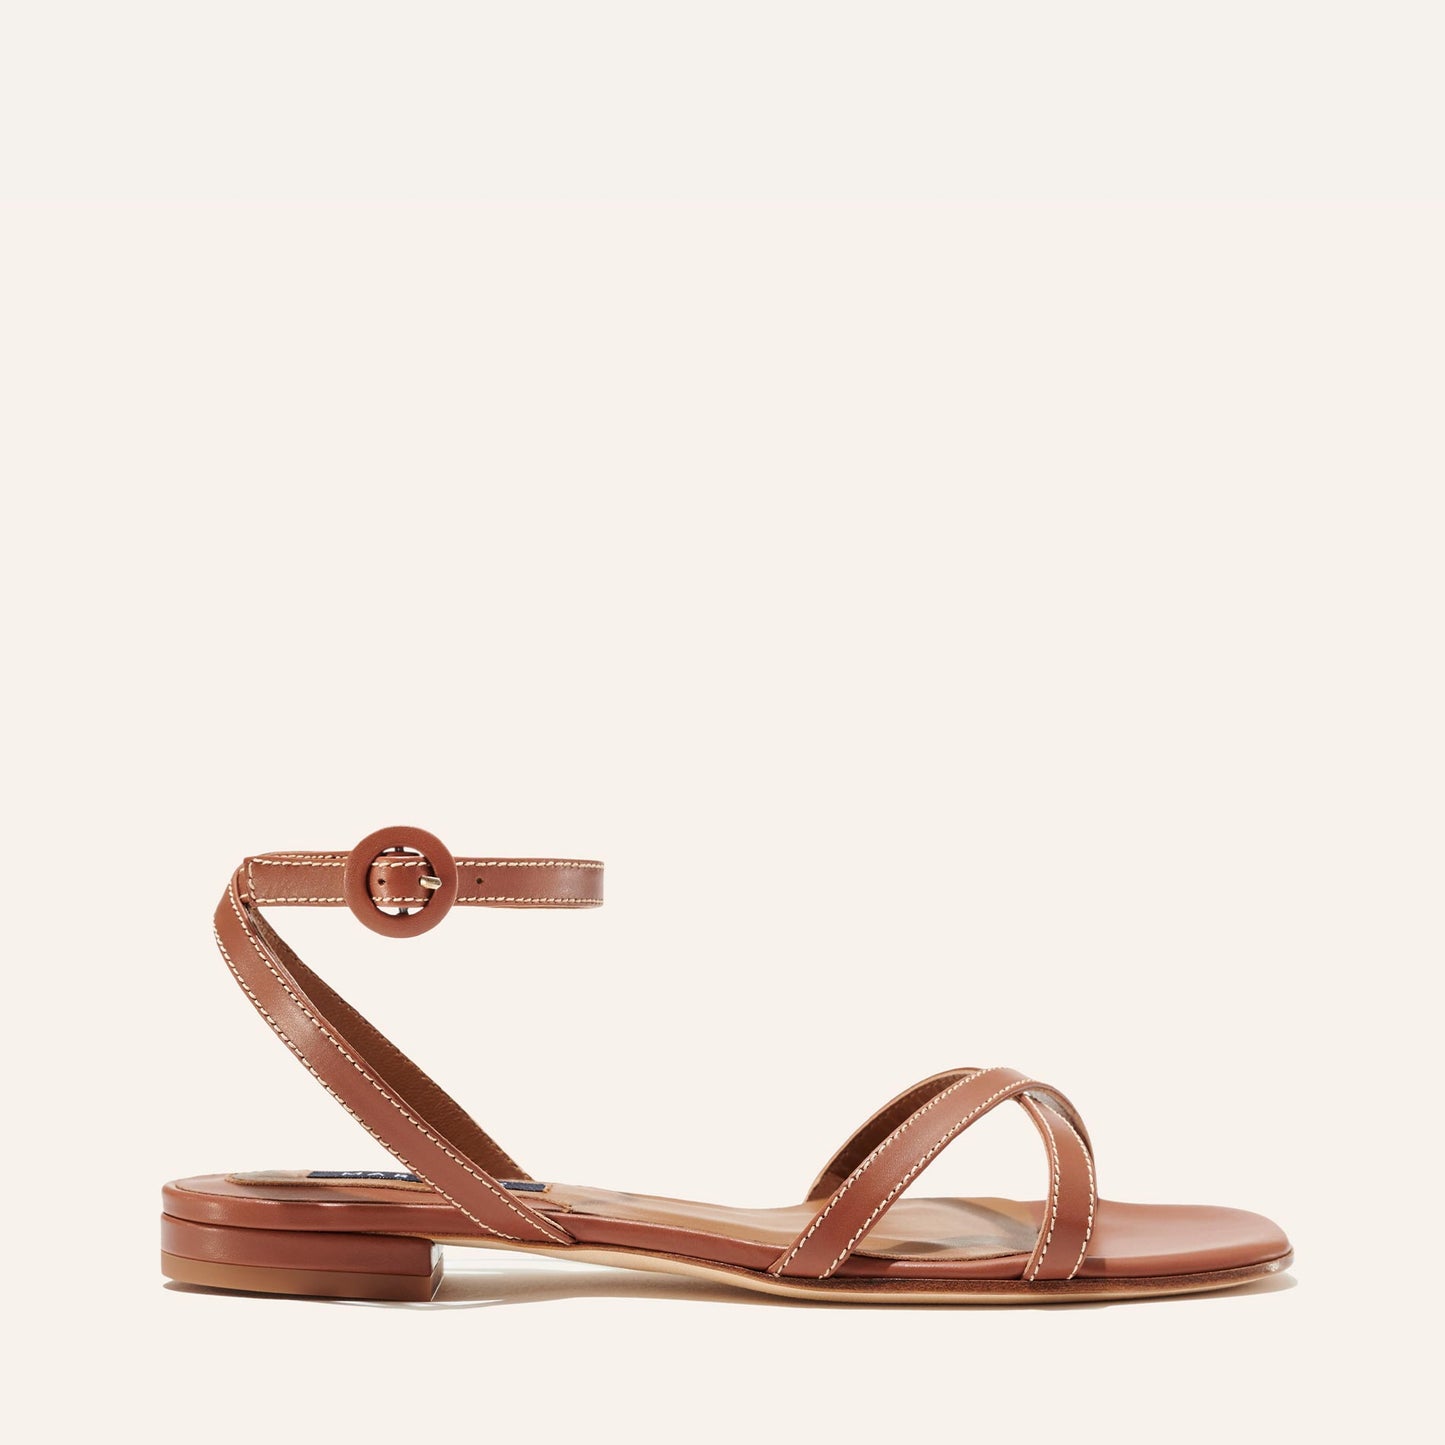 Margaux's classic and comfortable Flat Sandal, made in Spain from soft, saddle brown Italian nappa leather